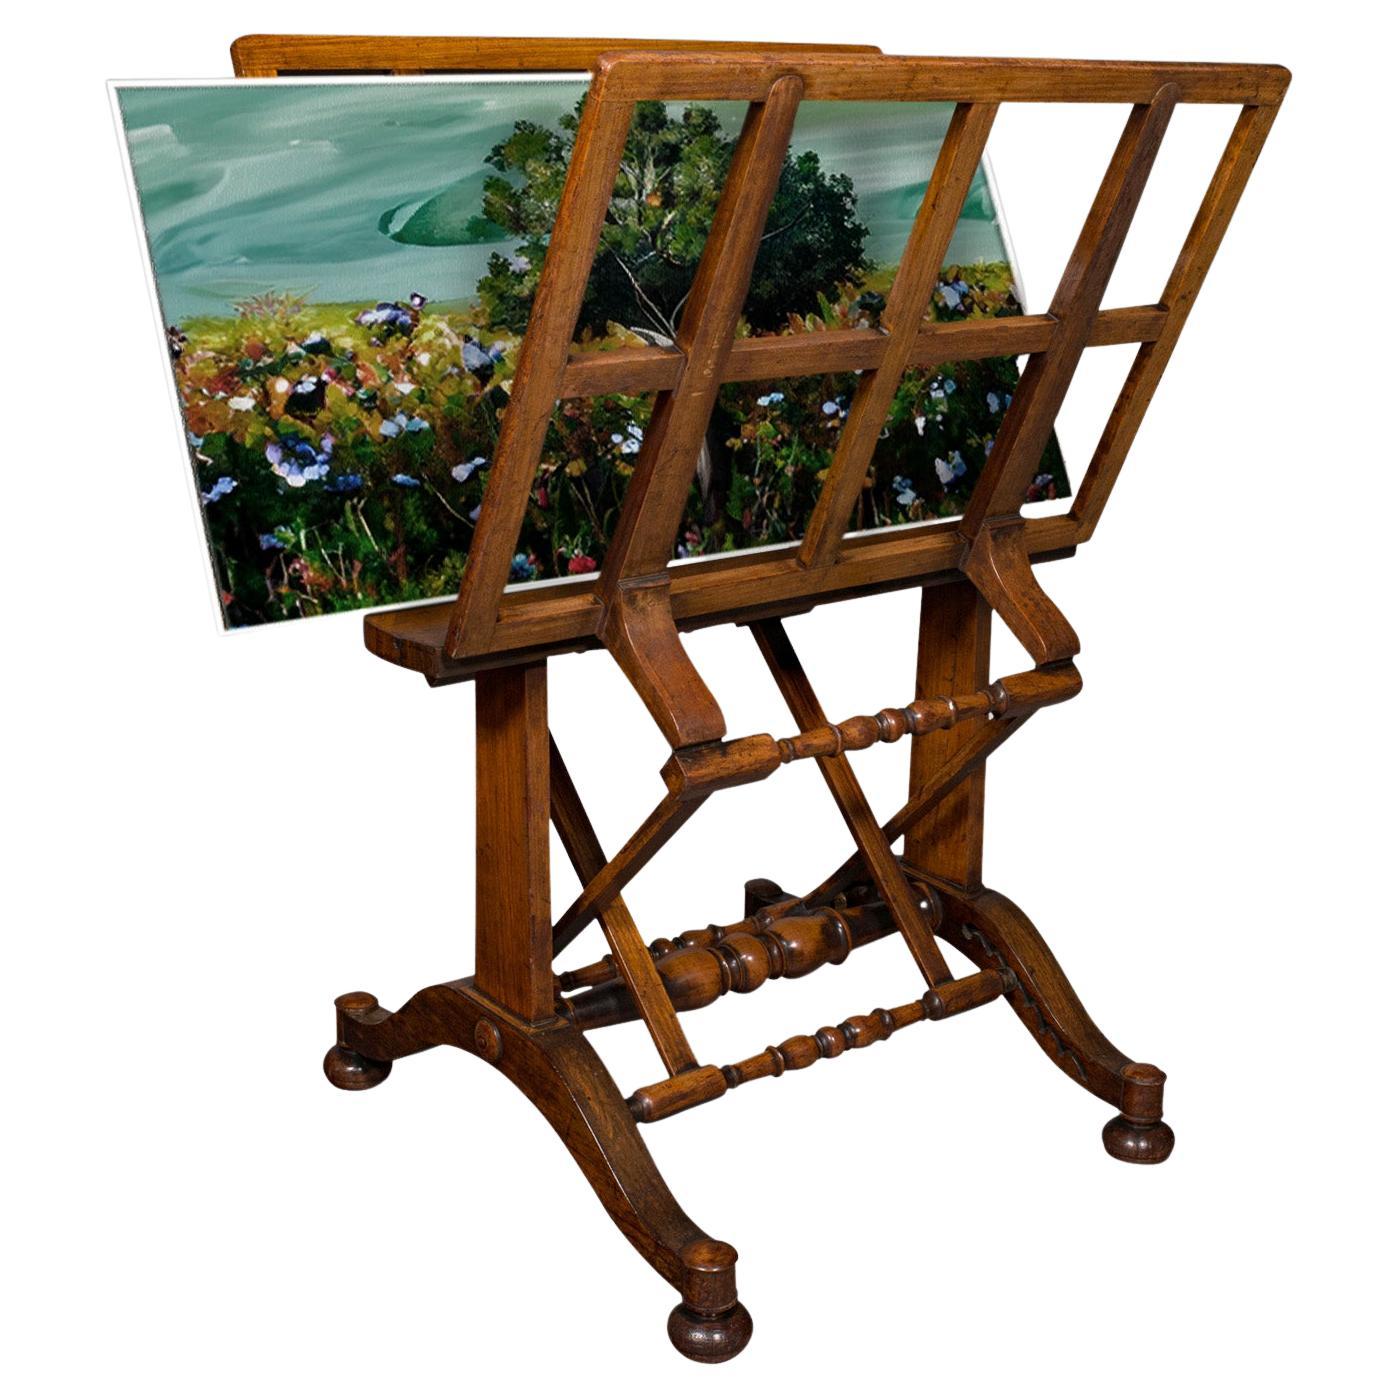 Antique Artist's Folio Stand, English, Architect's Picture Rack, Regency, C1820 For Sale